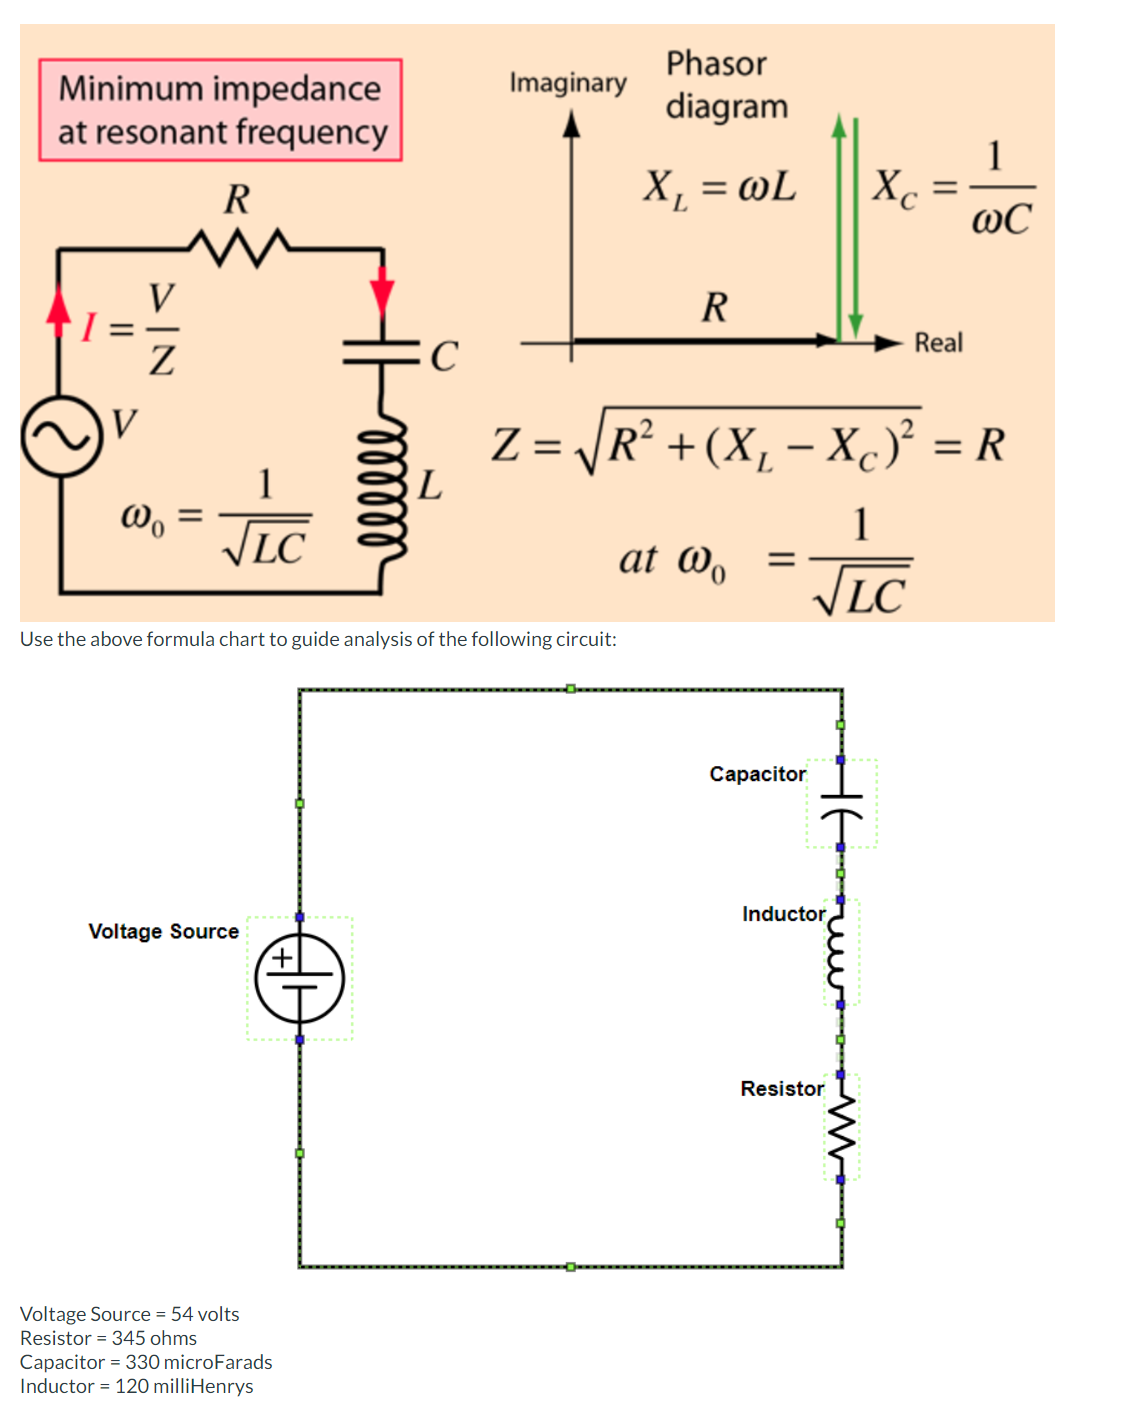 Minimum impedance
at resonant frequency
V
DIN
V
Z
Wo
R
√LC
Voltage Source
Voltage Source = 54 volts
Resistor = 345 ohms
④
с
Use the above formula chart to guide analysis of the following circuit:
Capacitor = 330 microfarads
Inductor = 120 milliHenrys
L
Imaginary
Phasor
diagram
X₁ = @L
R
at Wo =
Capacitor
Z= |R² + (X₁ − Xc)² = R
1
√LC
T
Inductor
Xc
Resistor
=
Real
1
@C